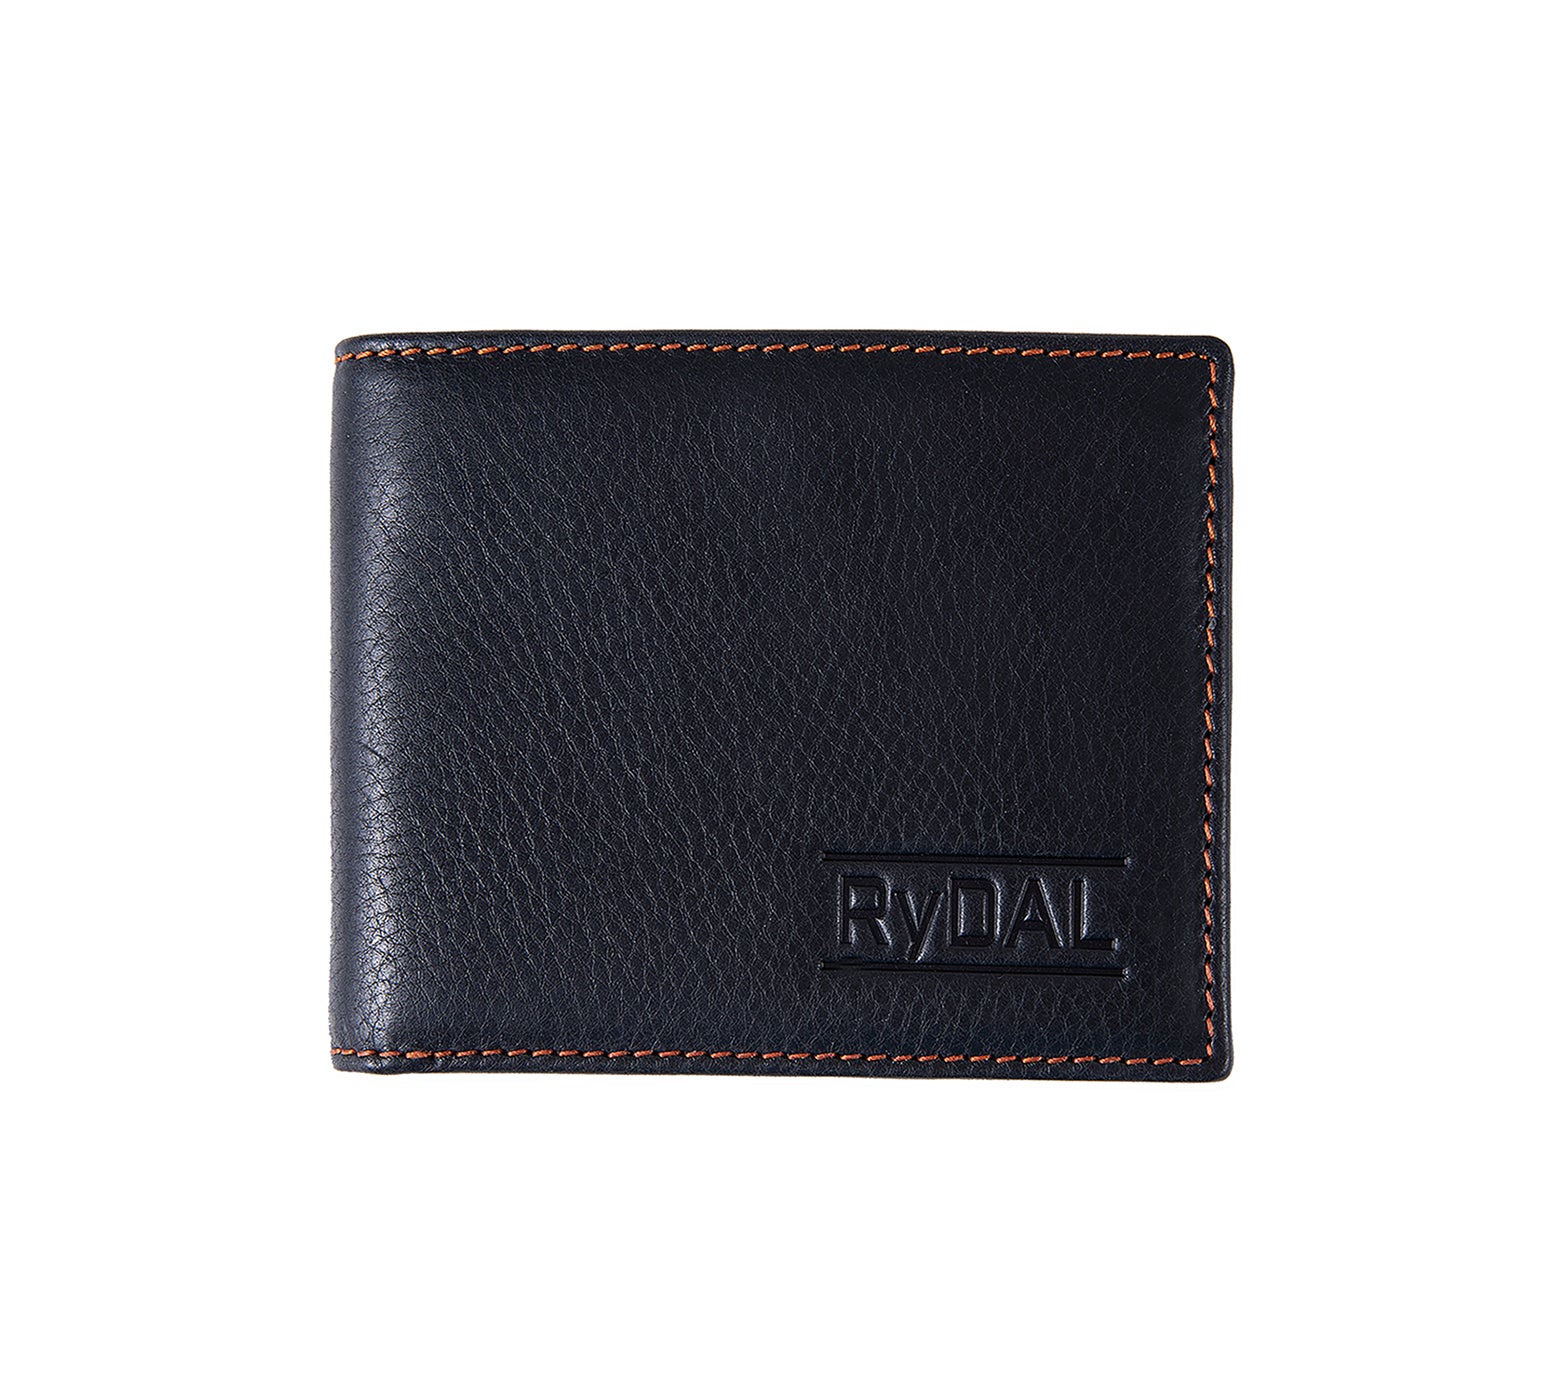 Mens Leather Wallet from Rydal in 'Black/Rust'.